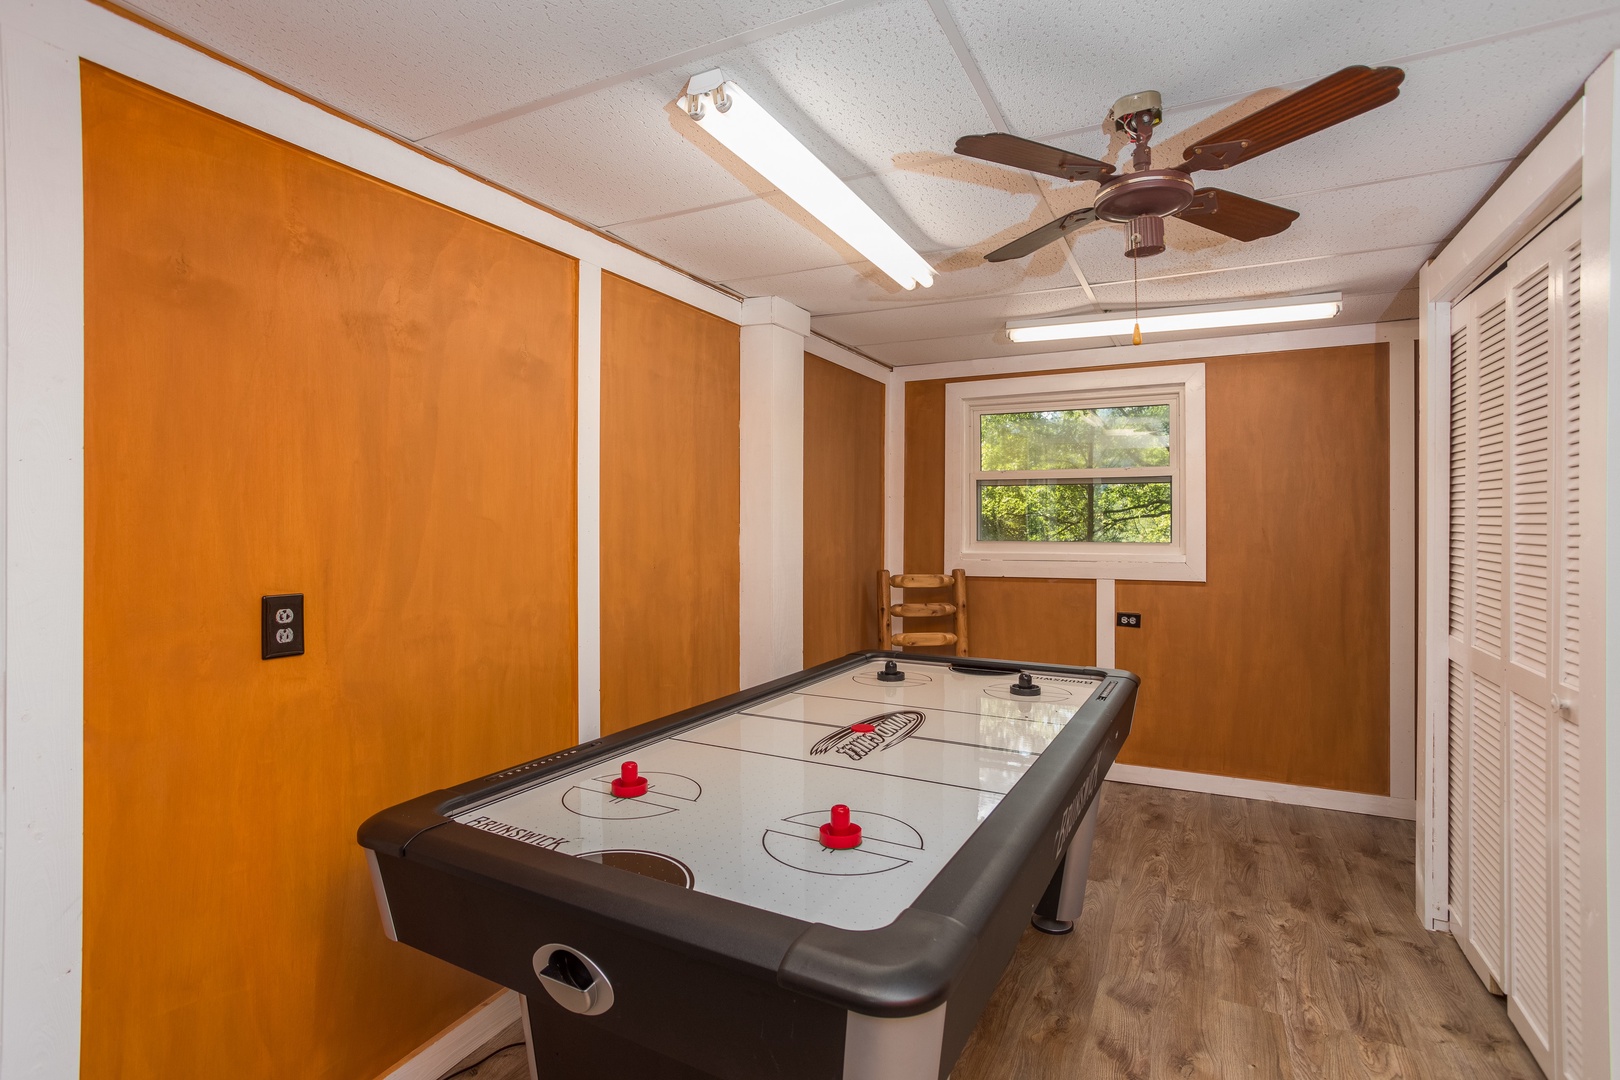 Air hockey table at Forever Country, a 3 bedroom cabin rental located in Pigeon Forge